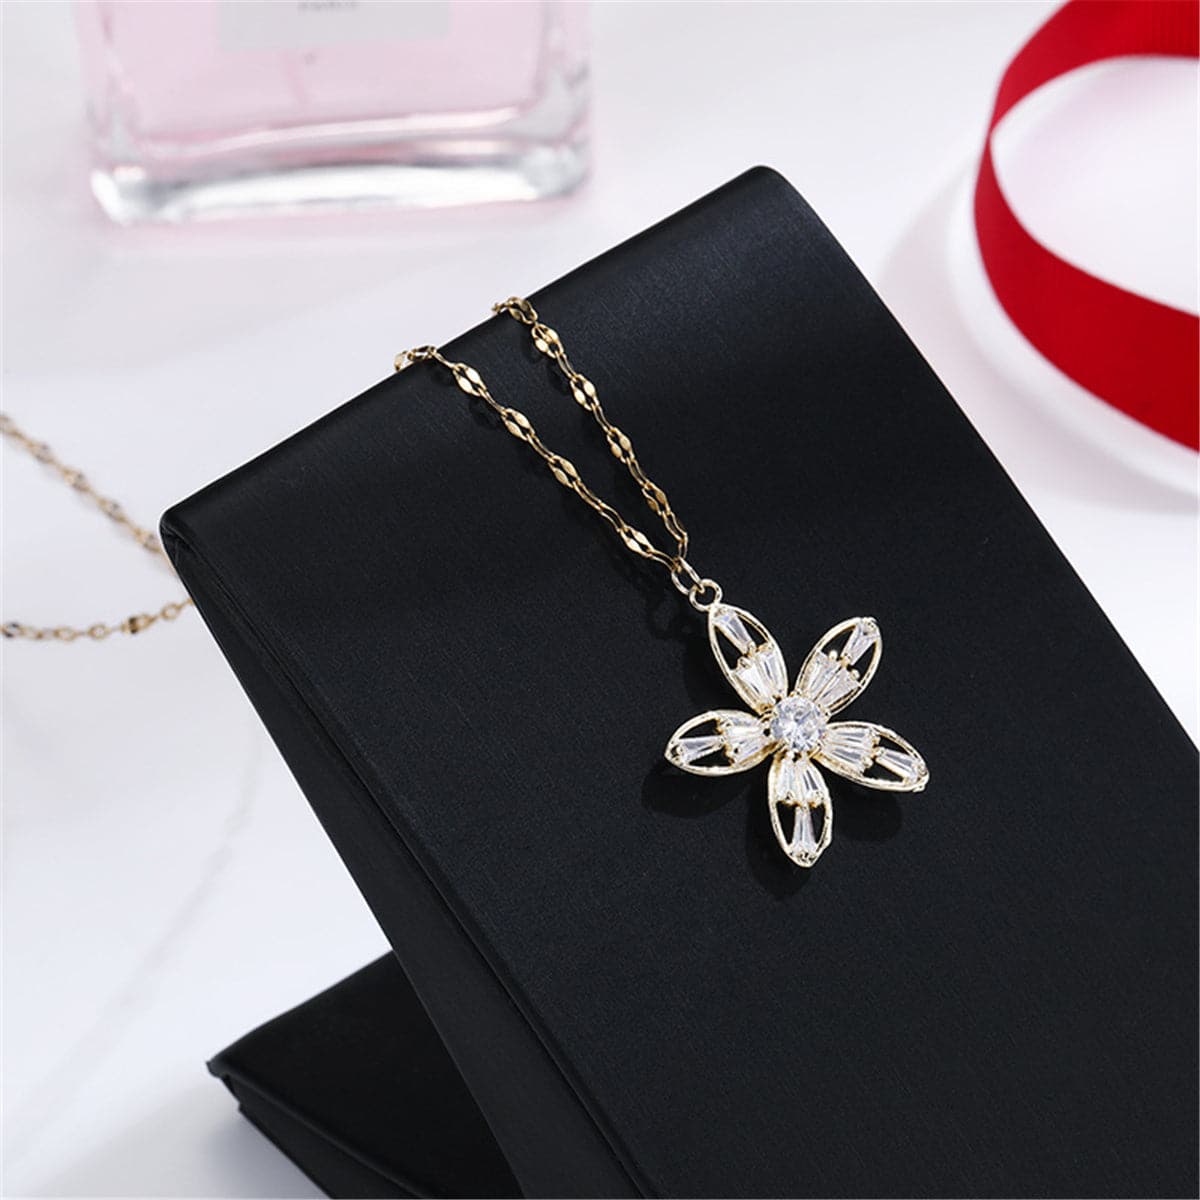 Cubic Zirconia & 18K Gold-Plated Flower Pendant Necklace